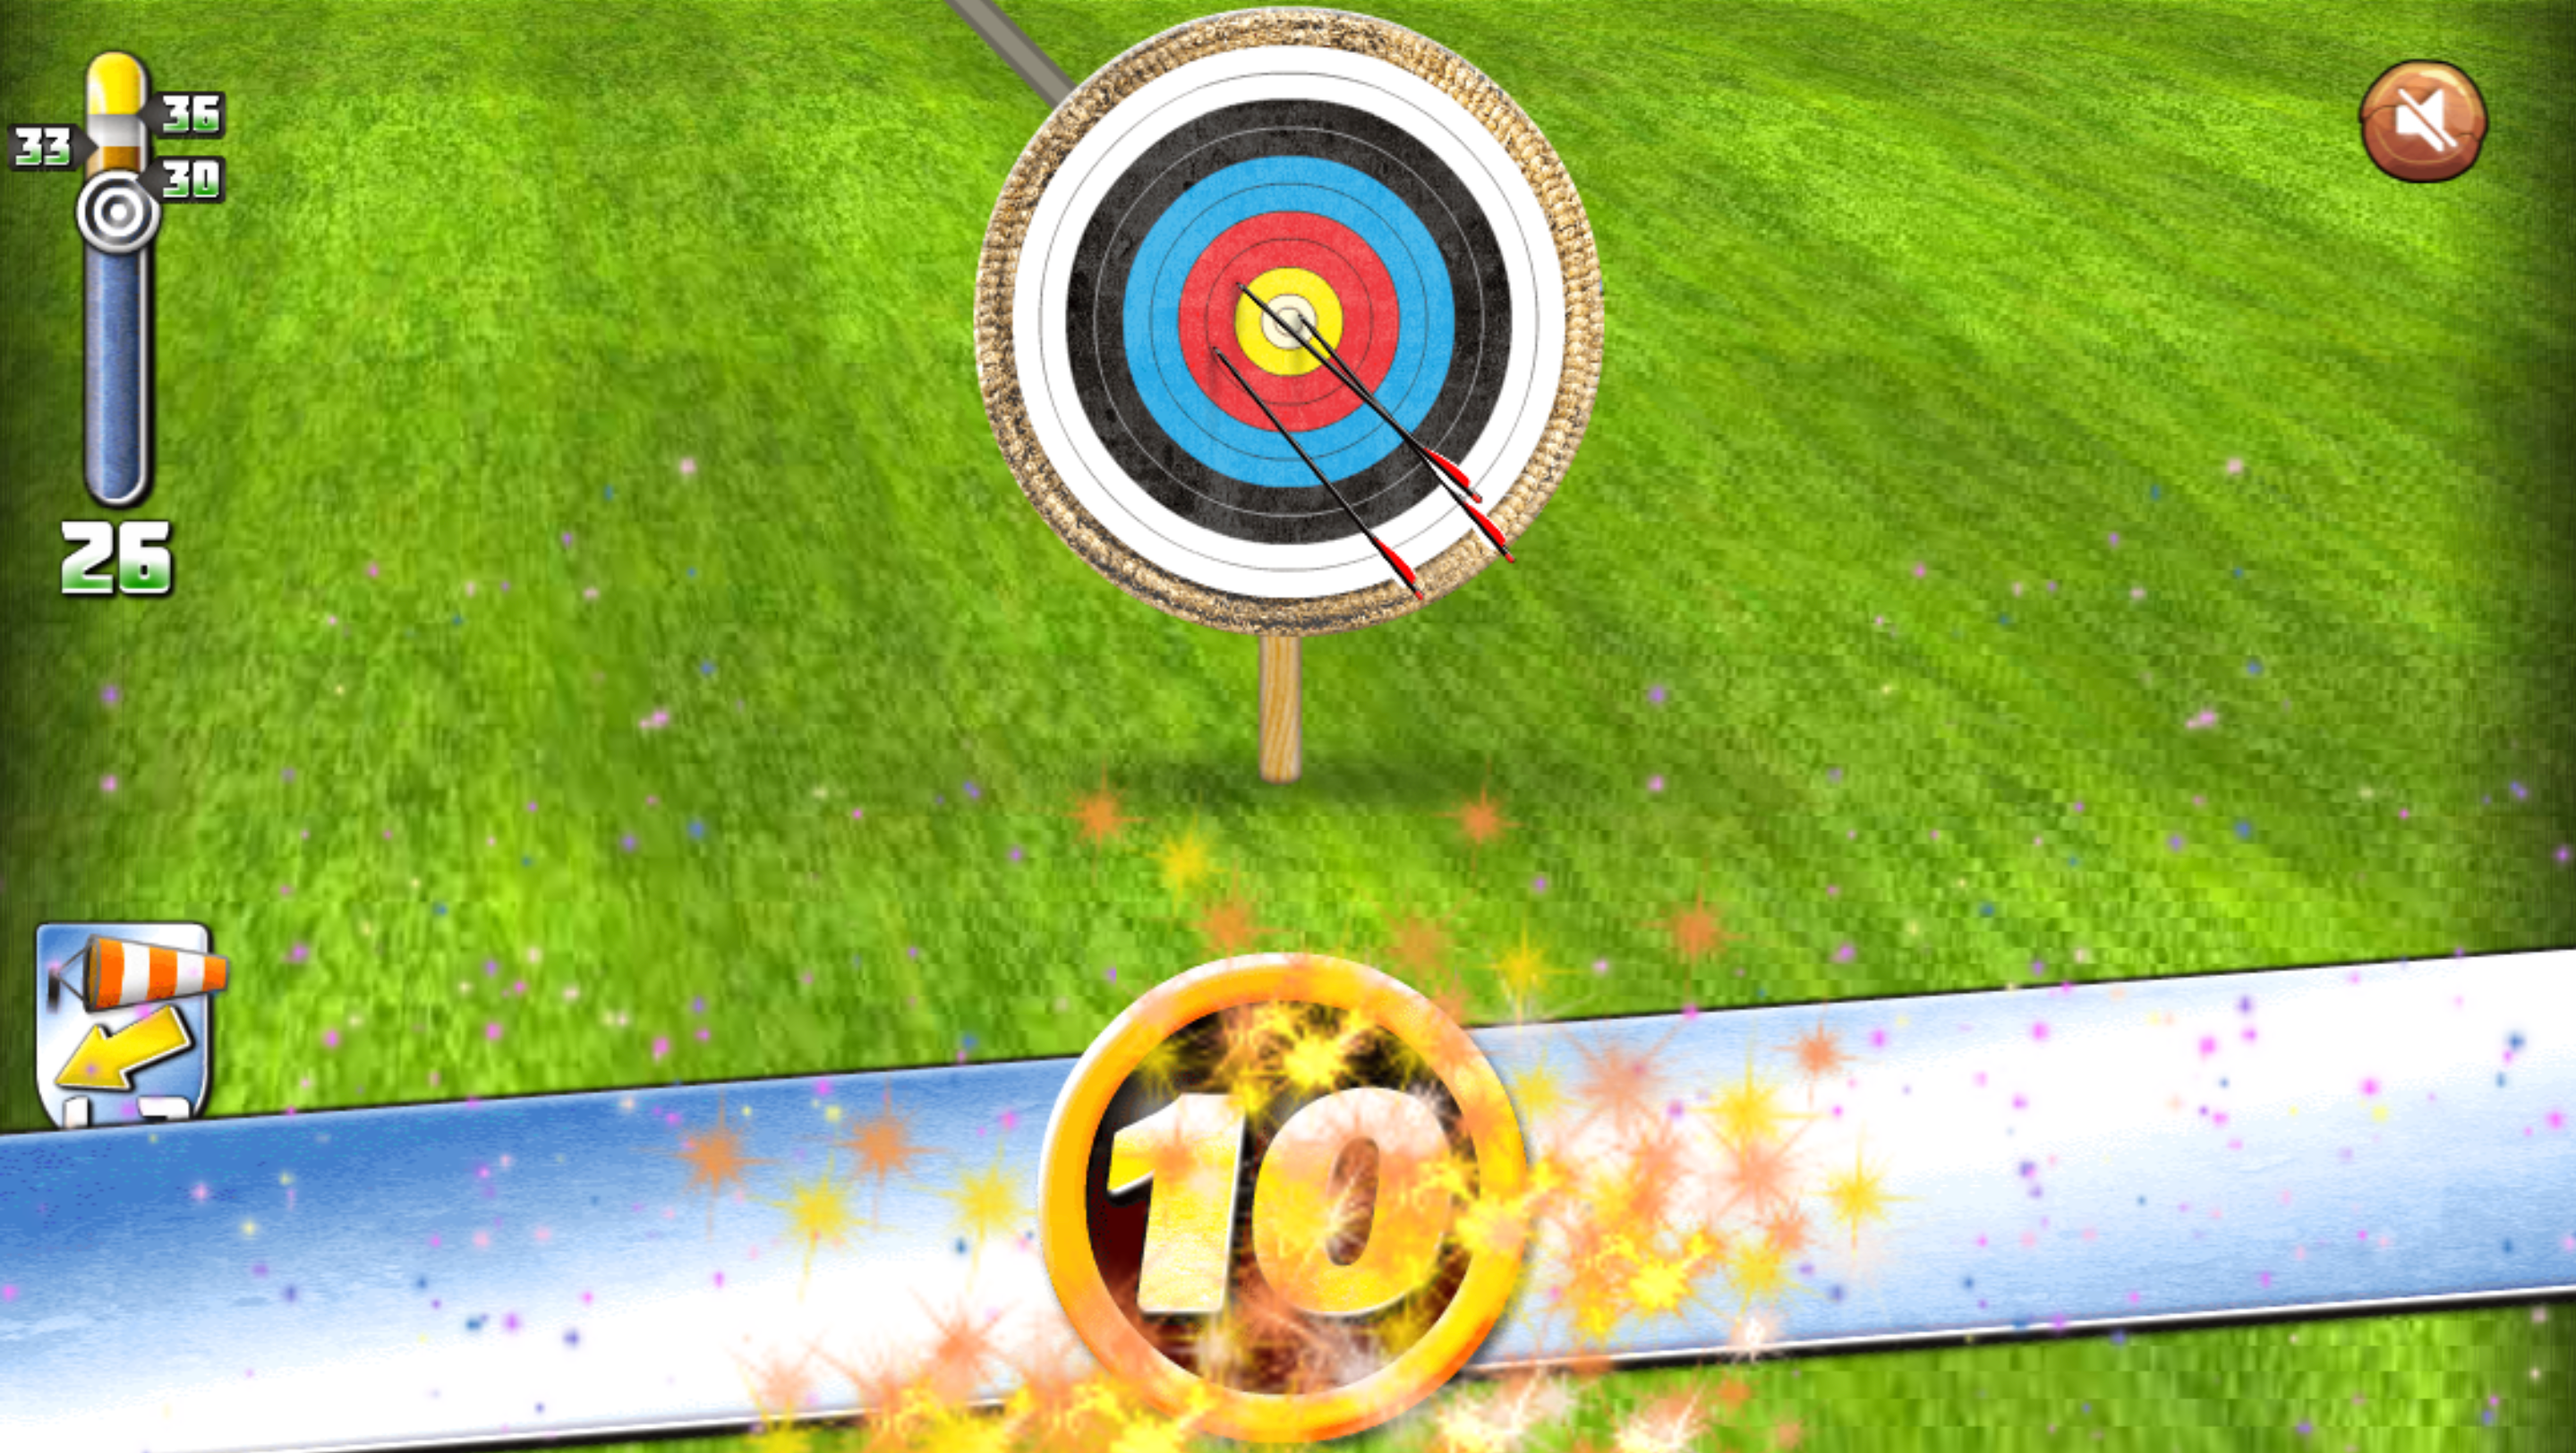 Archery World Tour Come giocare a Cricket Cup online